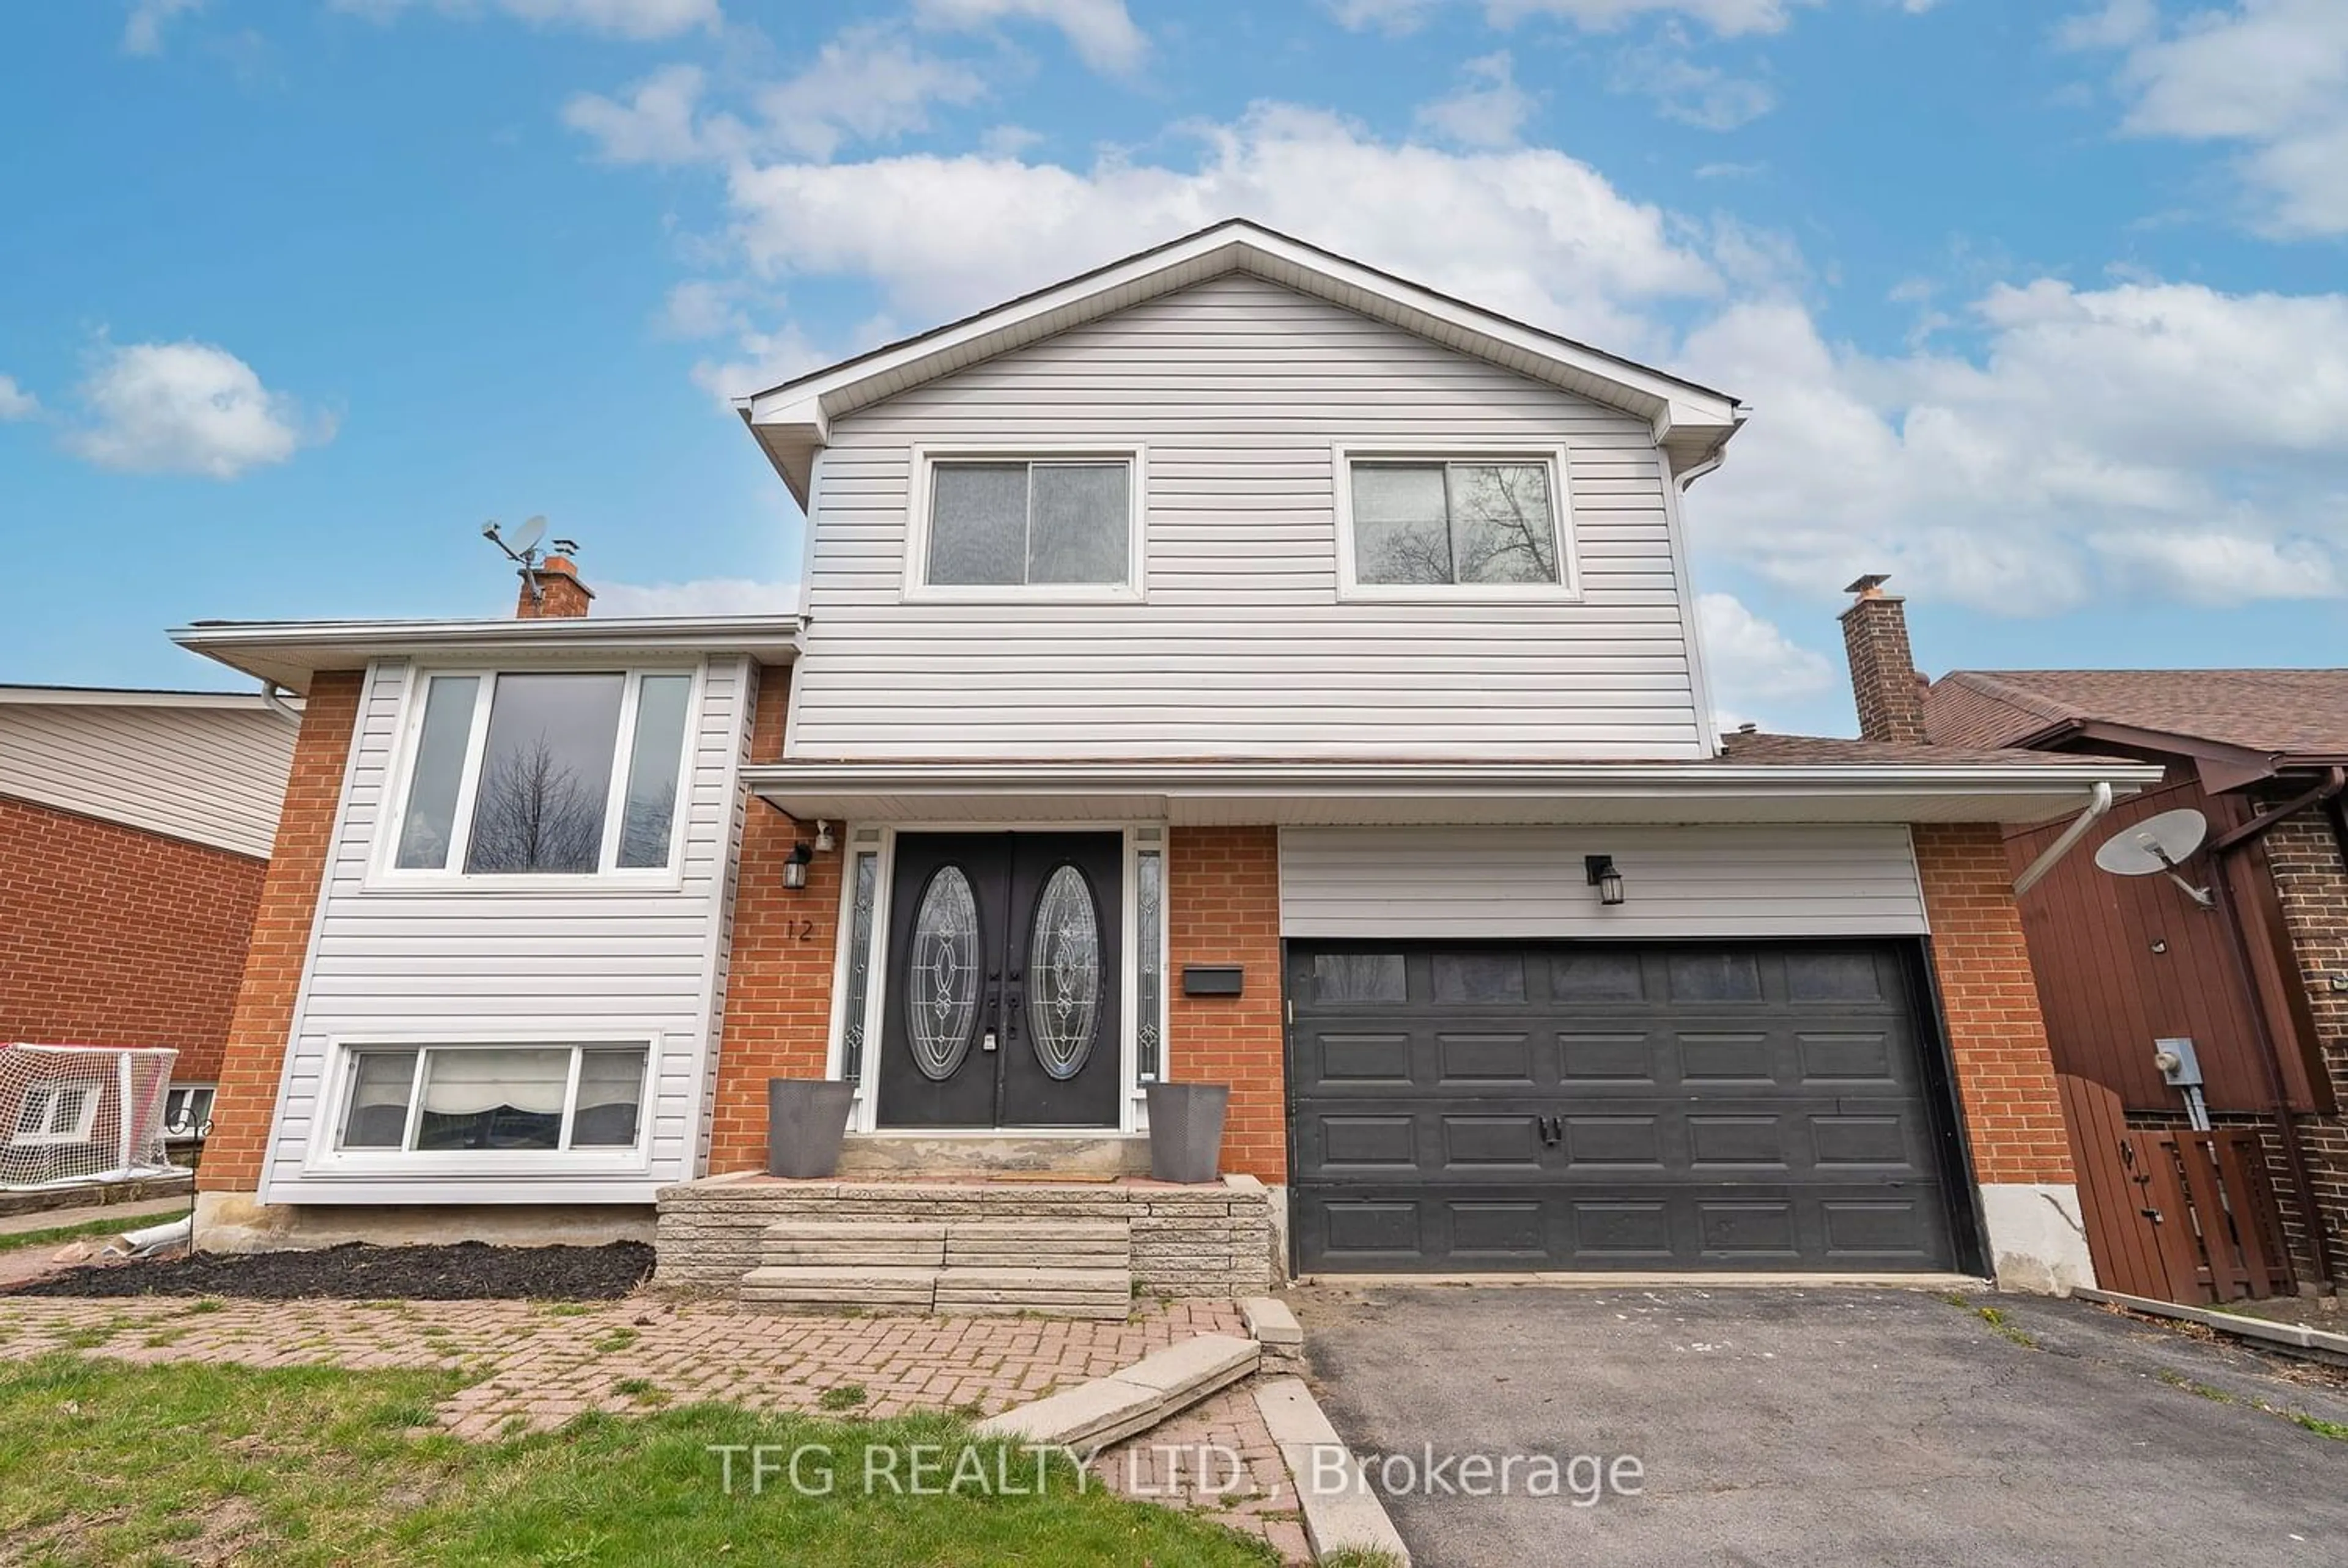 Frontside or backside of a home for 12 Mcgillivary Crt, Whitby Ontario L1P 1A3